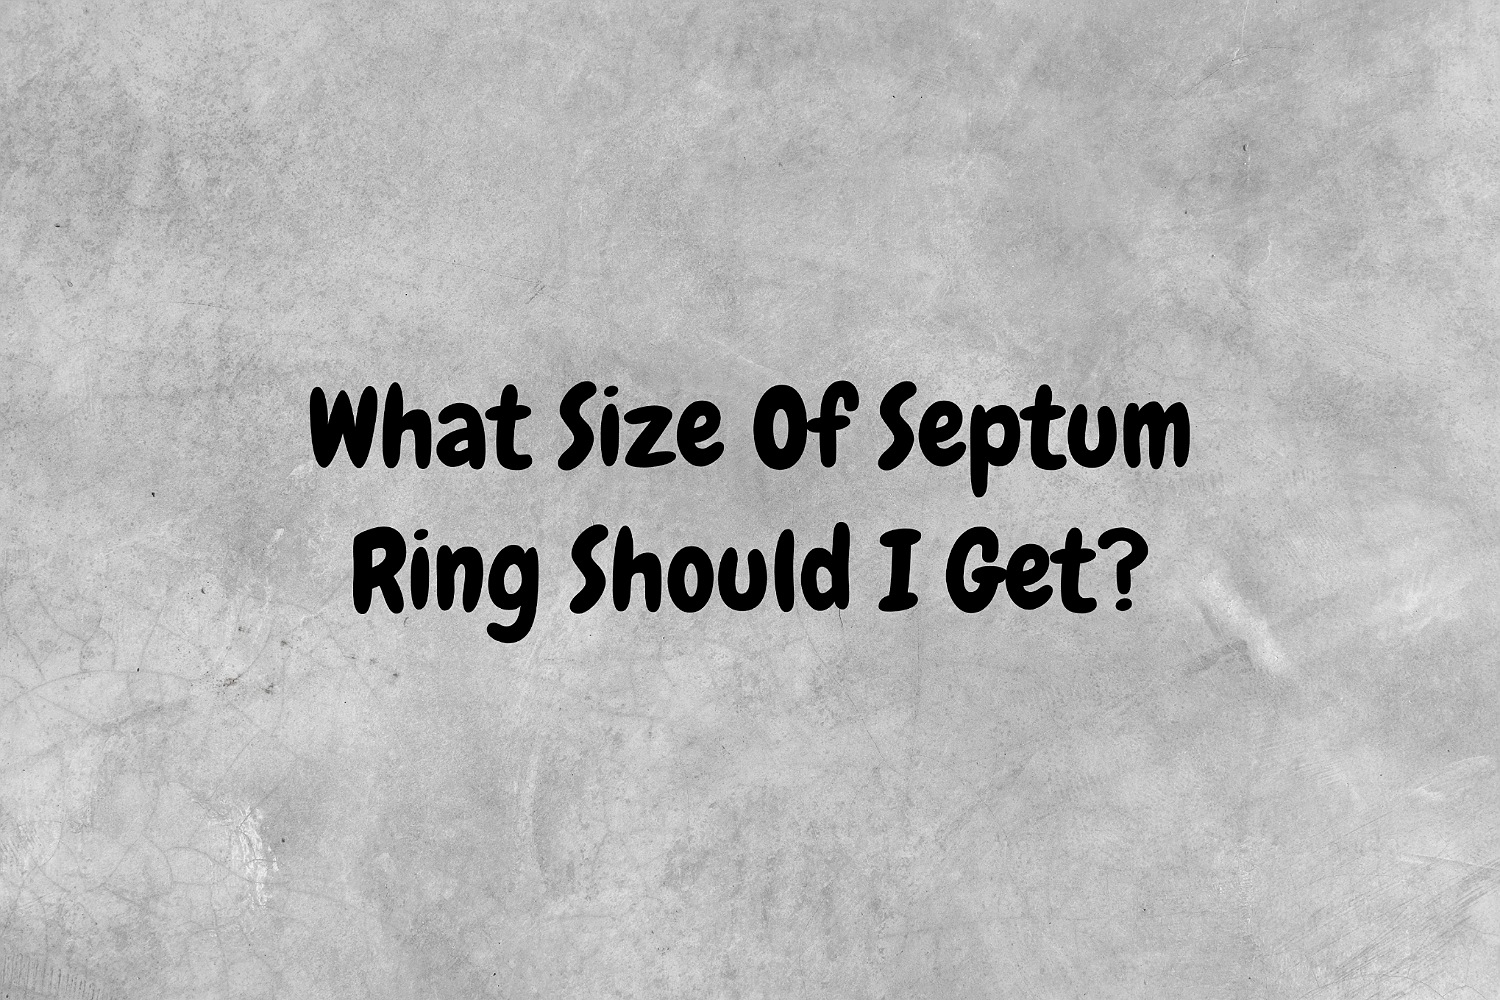 An image with a gray background with black text proposing the question, "What size of septum ring should I get?".